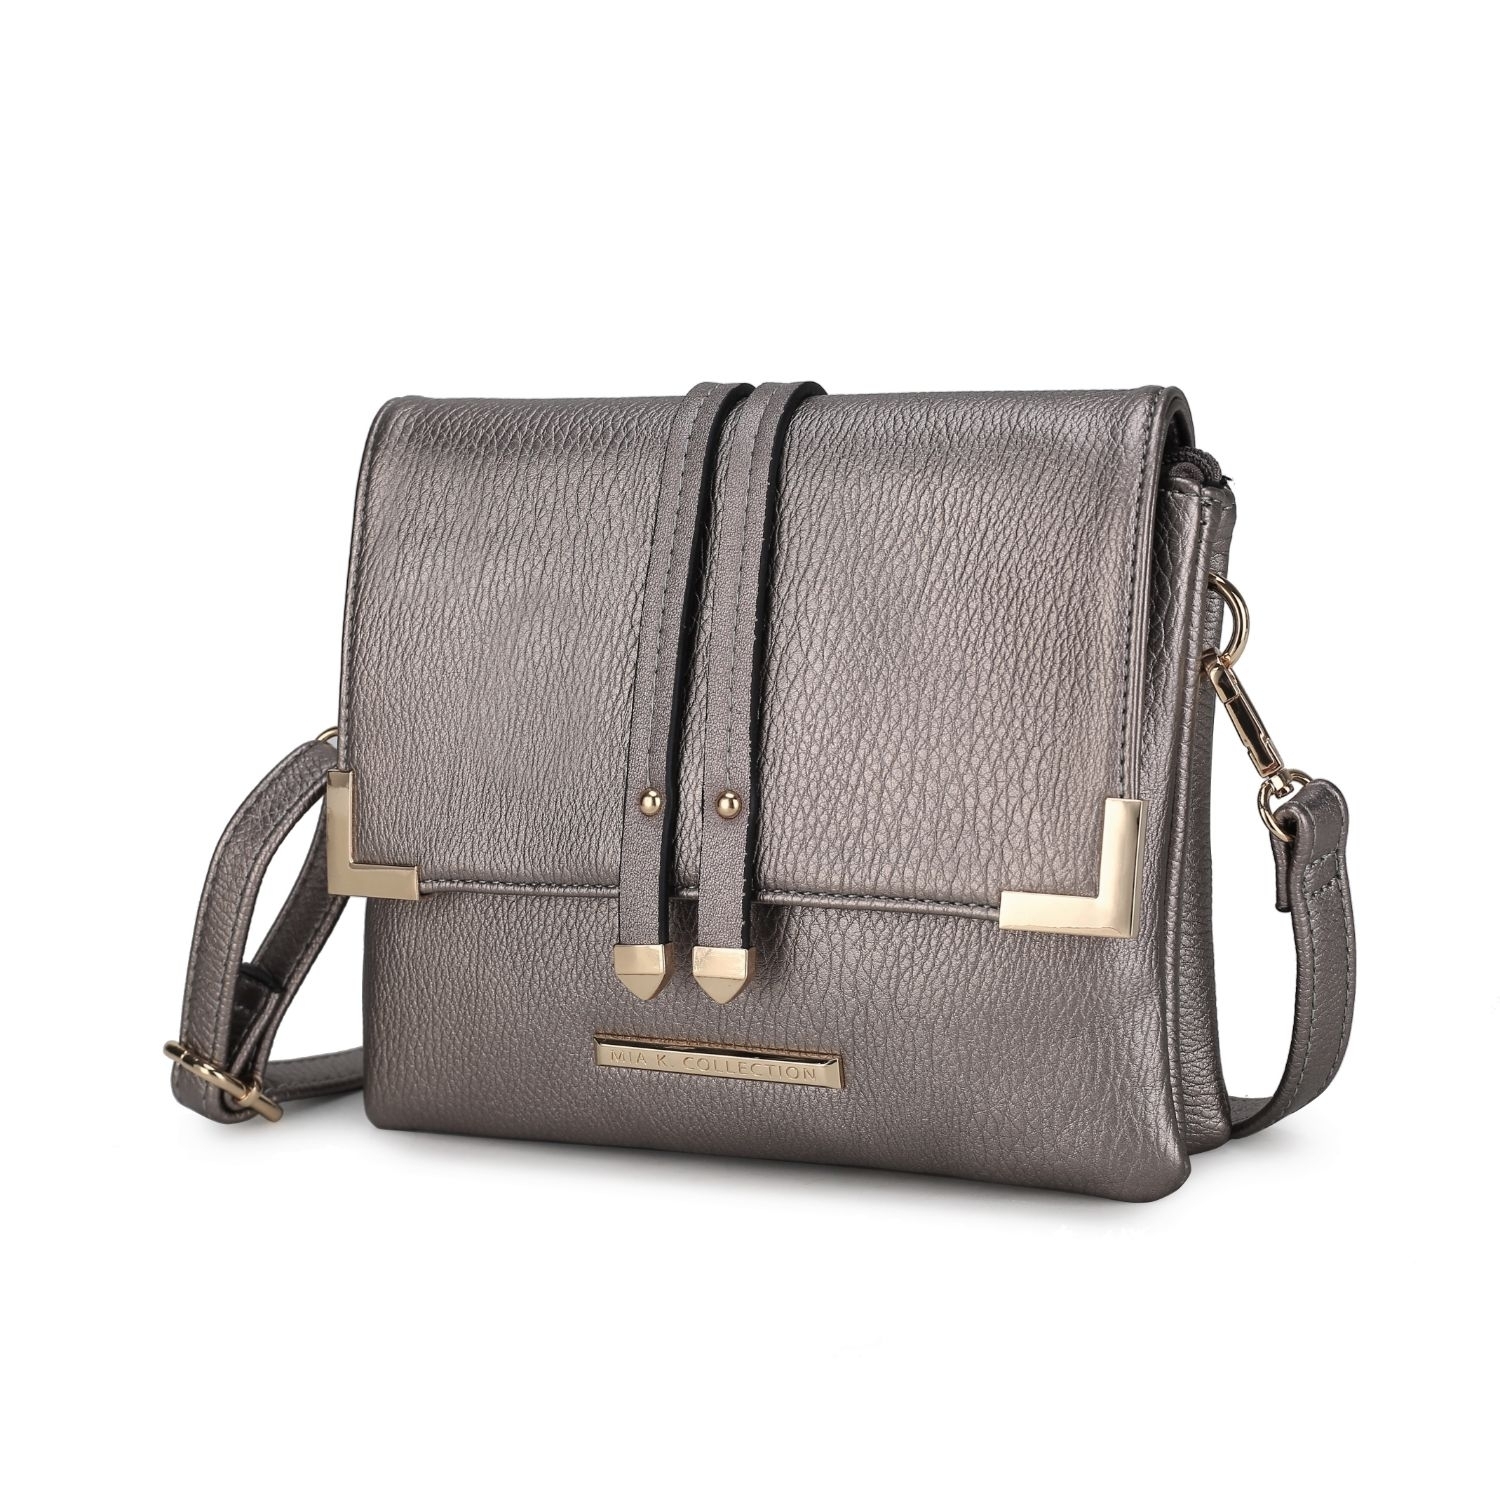 MKF Collection Valeska Multi Compartment Crossbody By Mia K. - Pewter